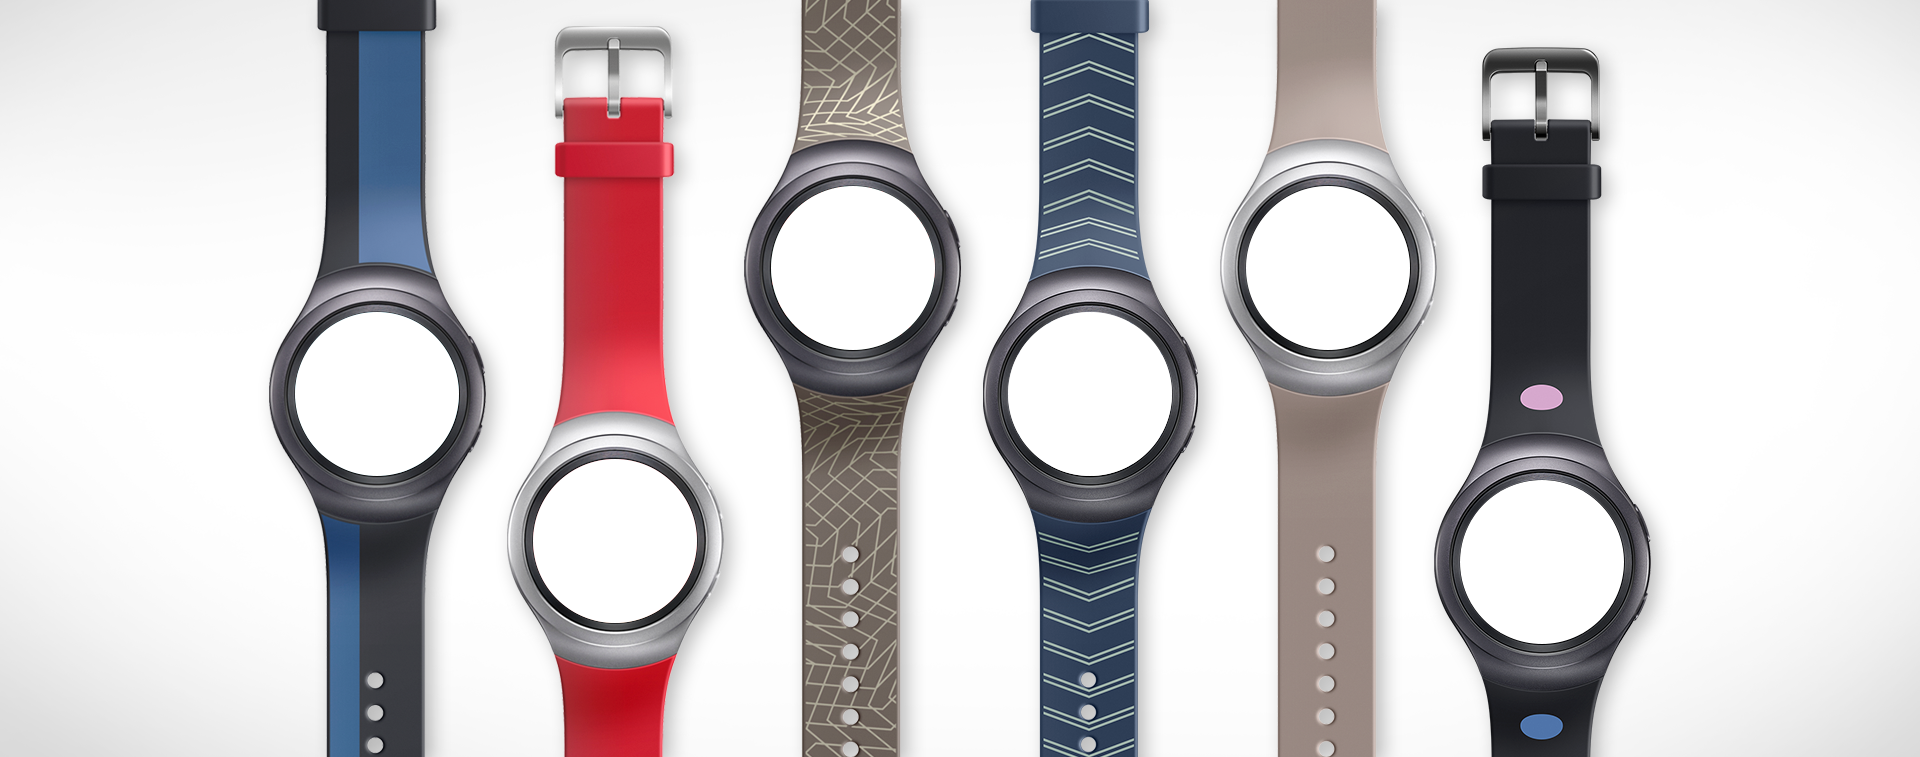 Six Gear S2s lined up with six different bands